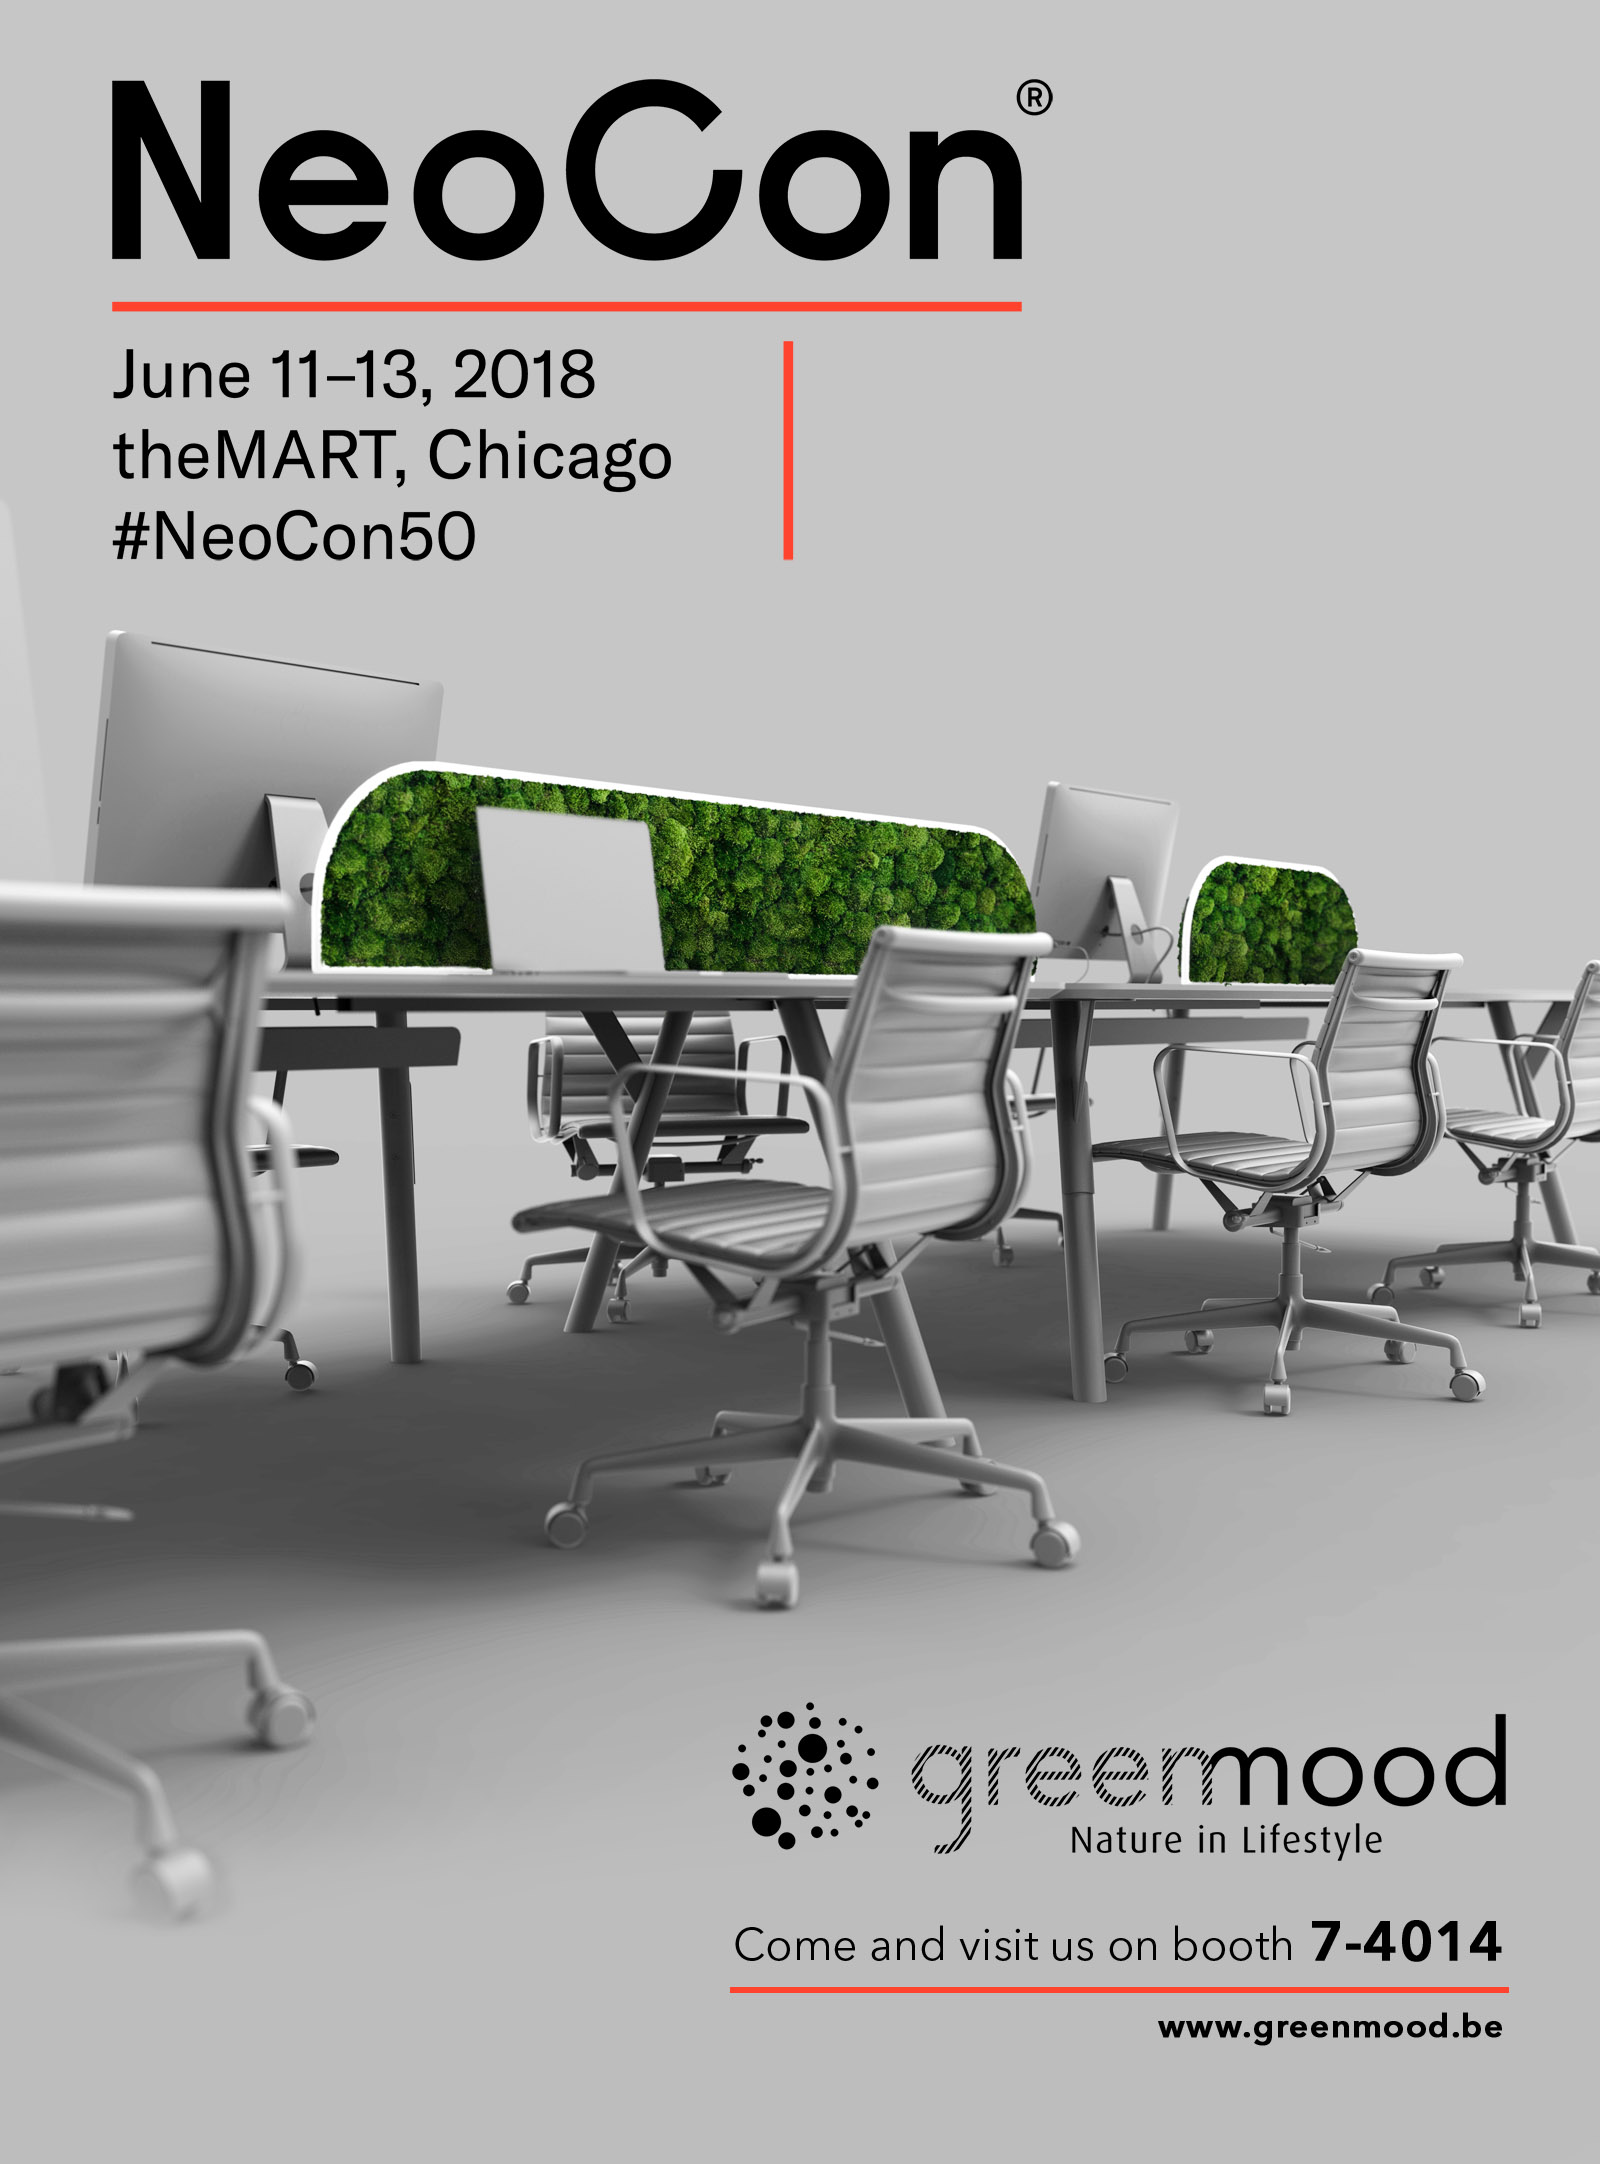 Greenmood in Archiproducts' article